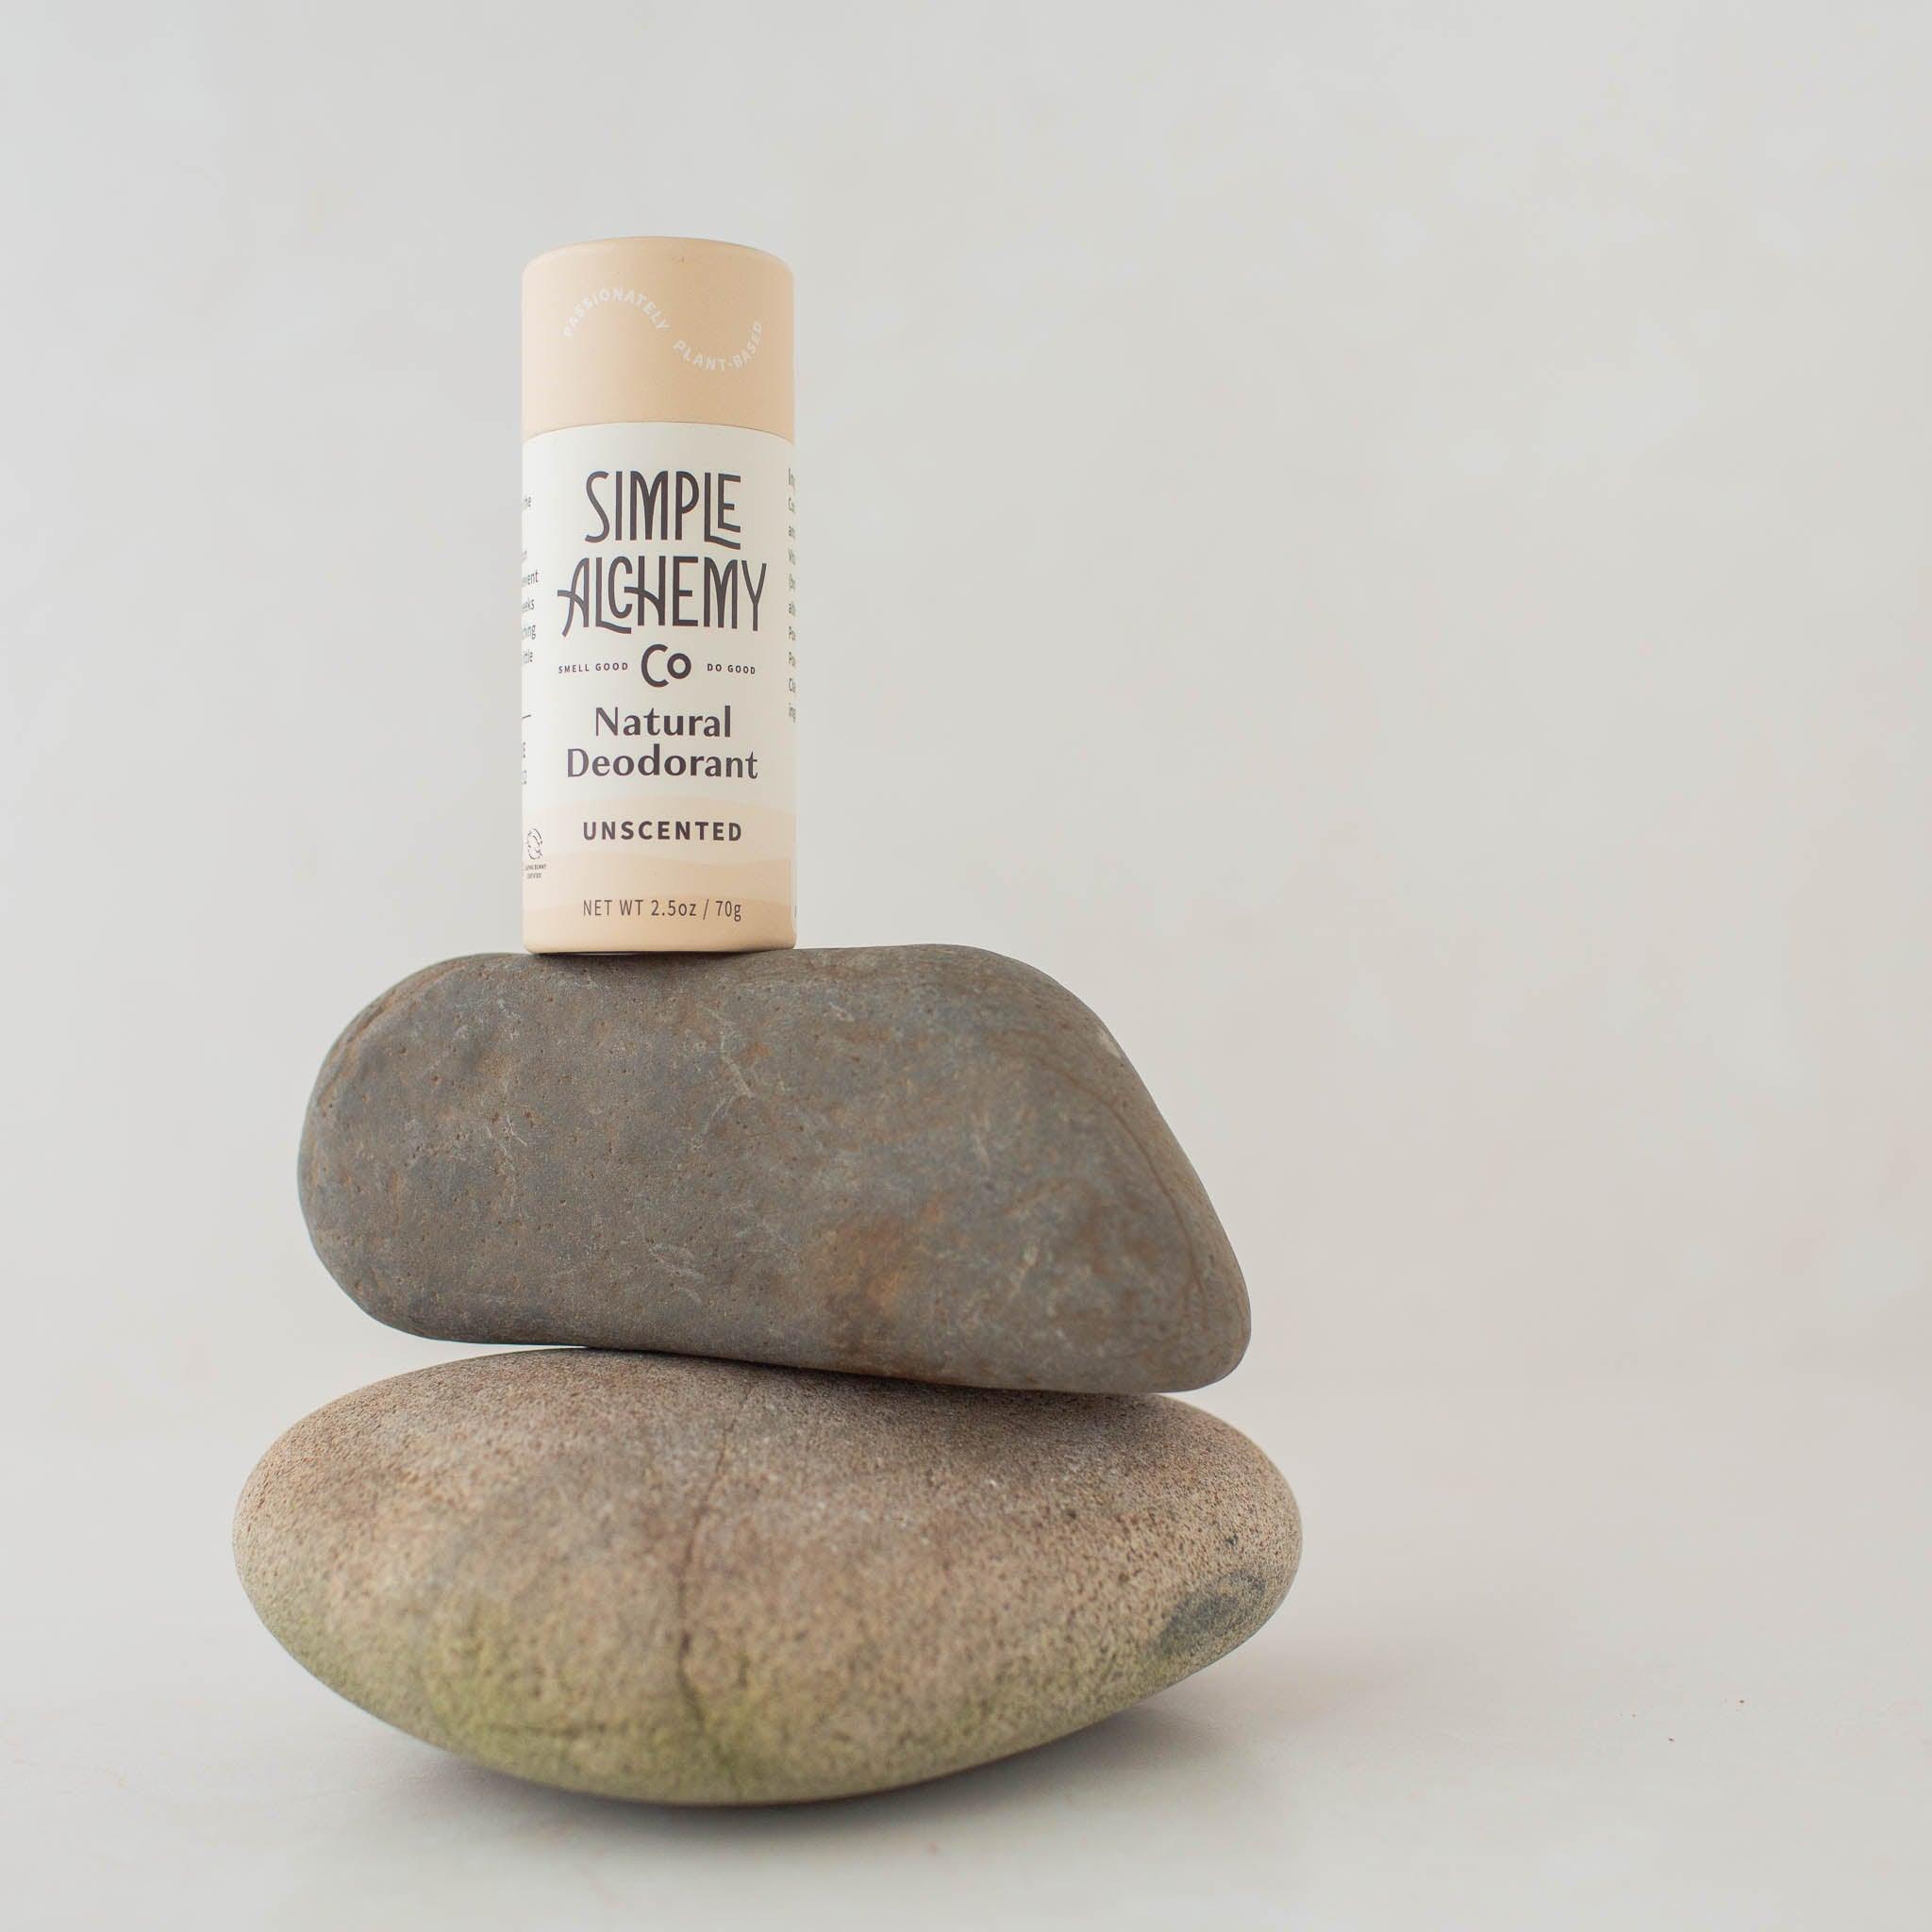 Cream colored compostable paper push-up tube of Unscented Natural Deodorant on two gray stones.